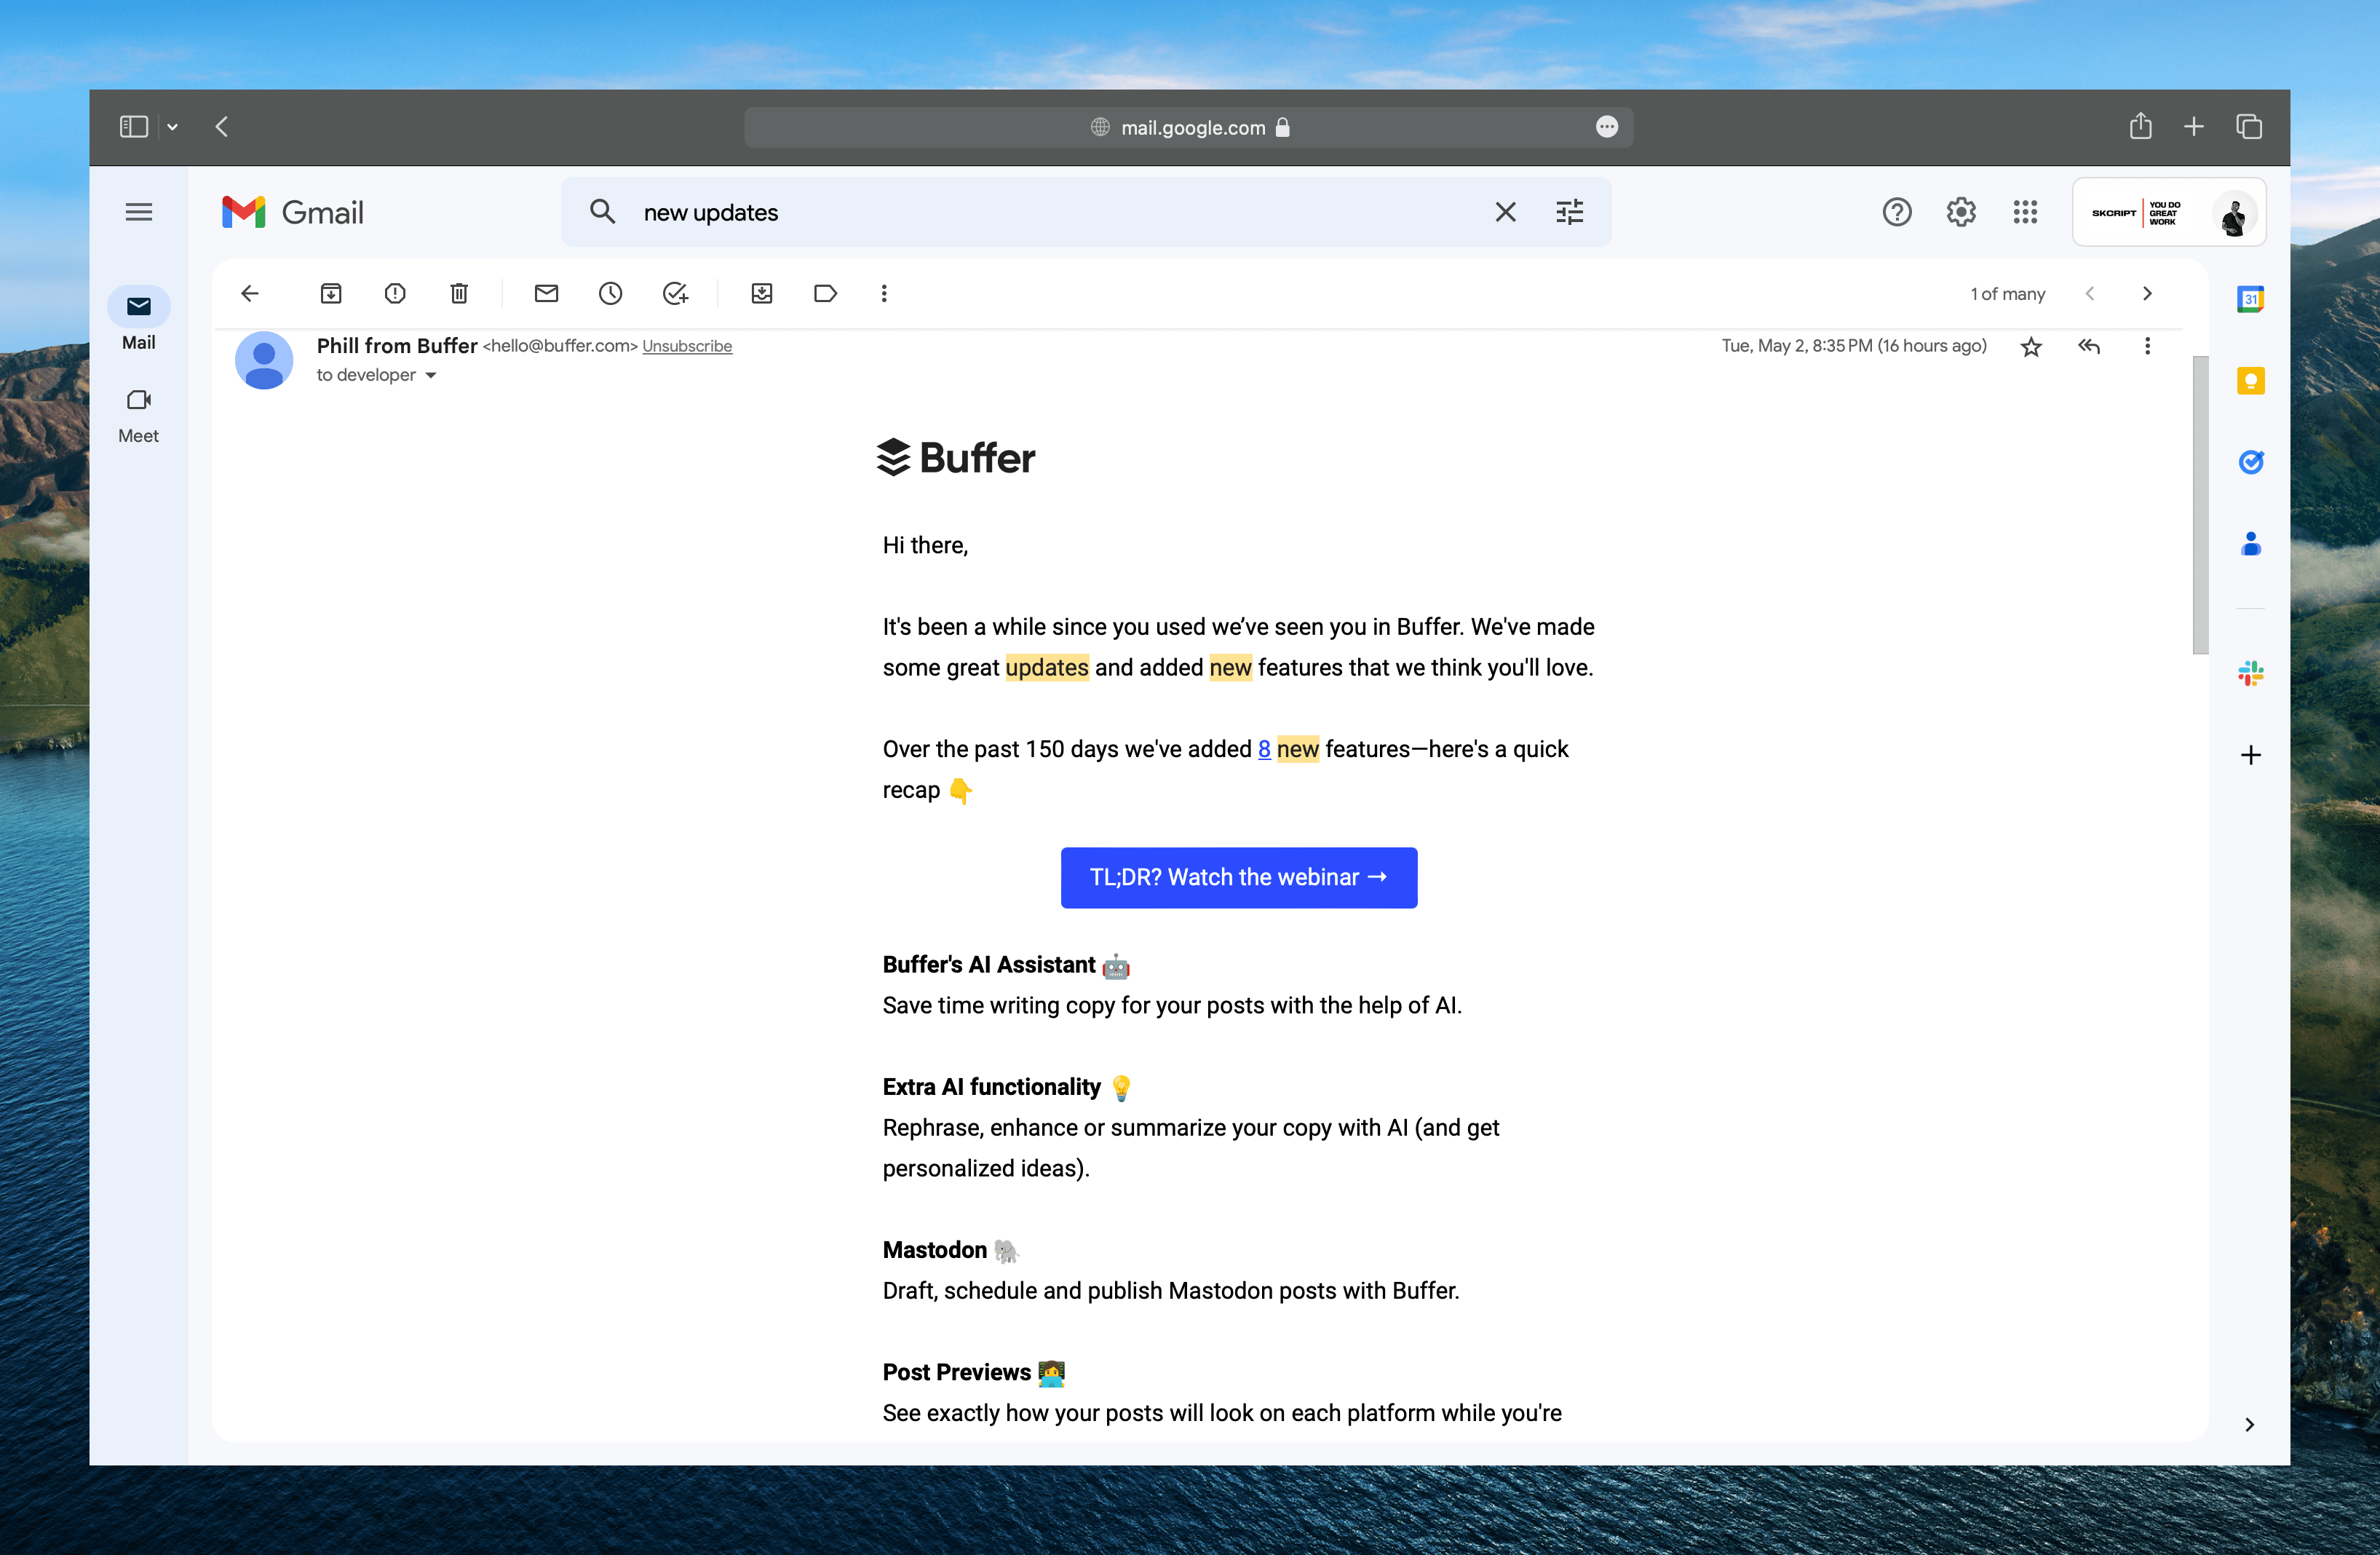 Buffer email about the updates they have made to a product.